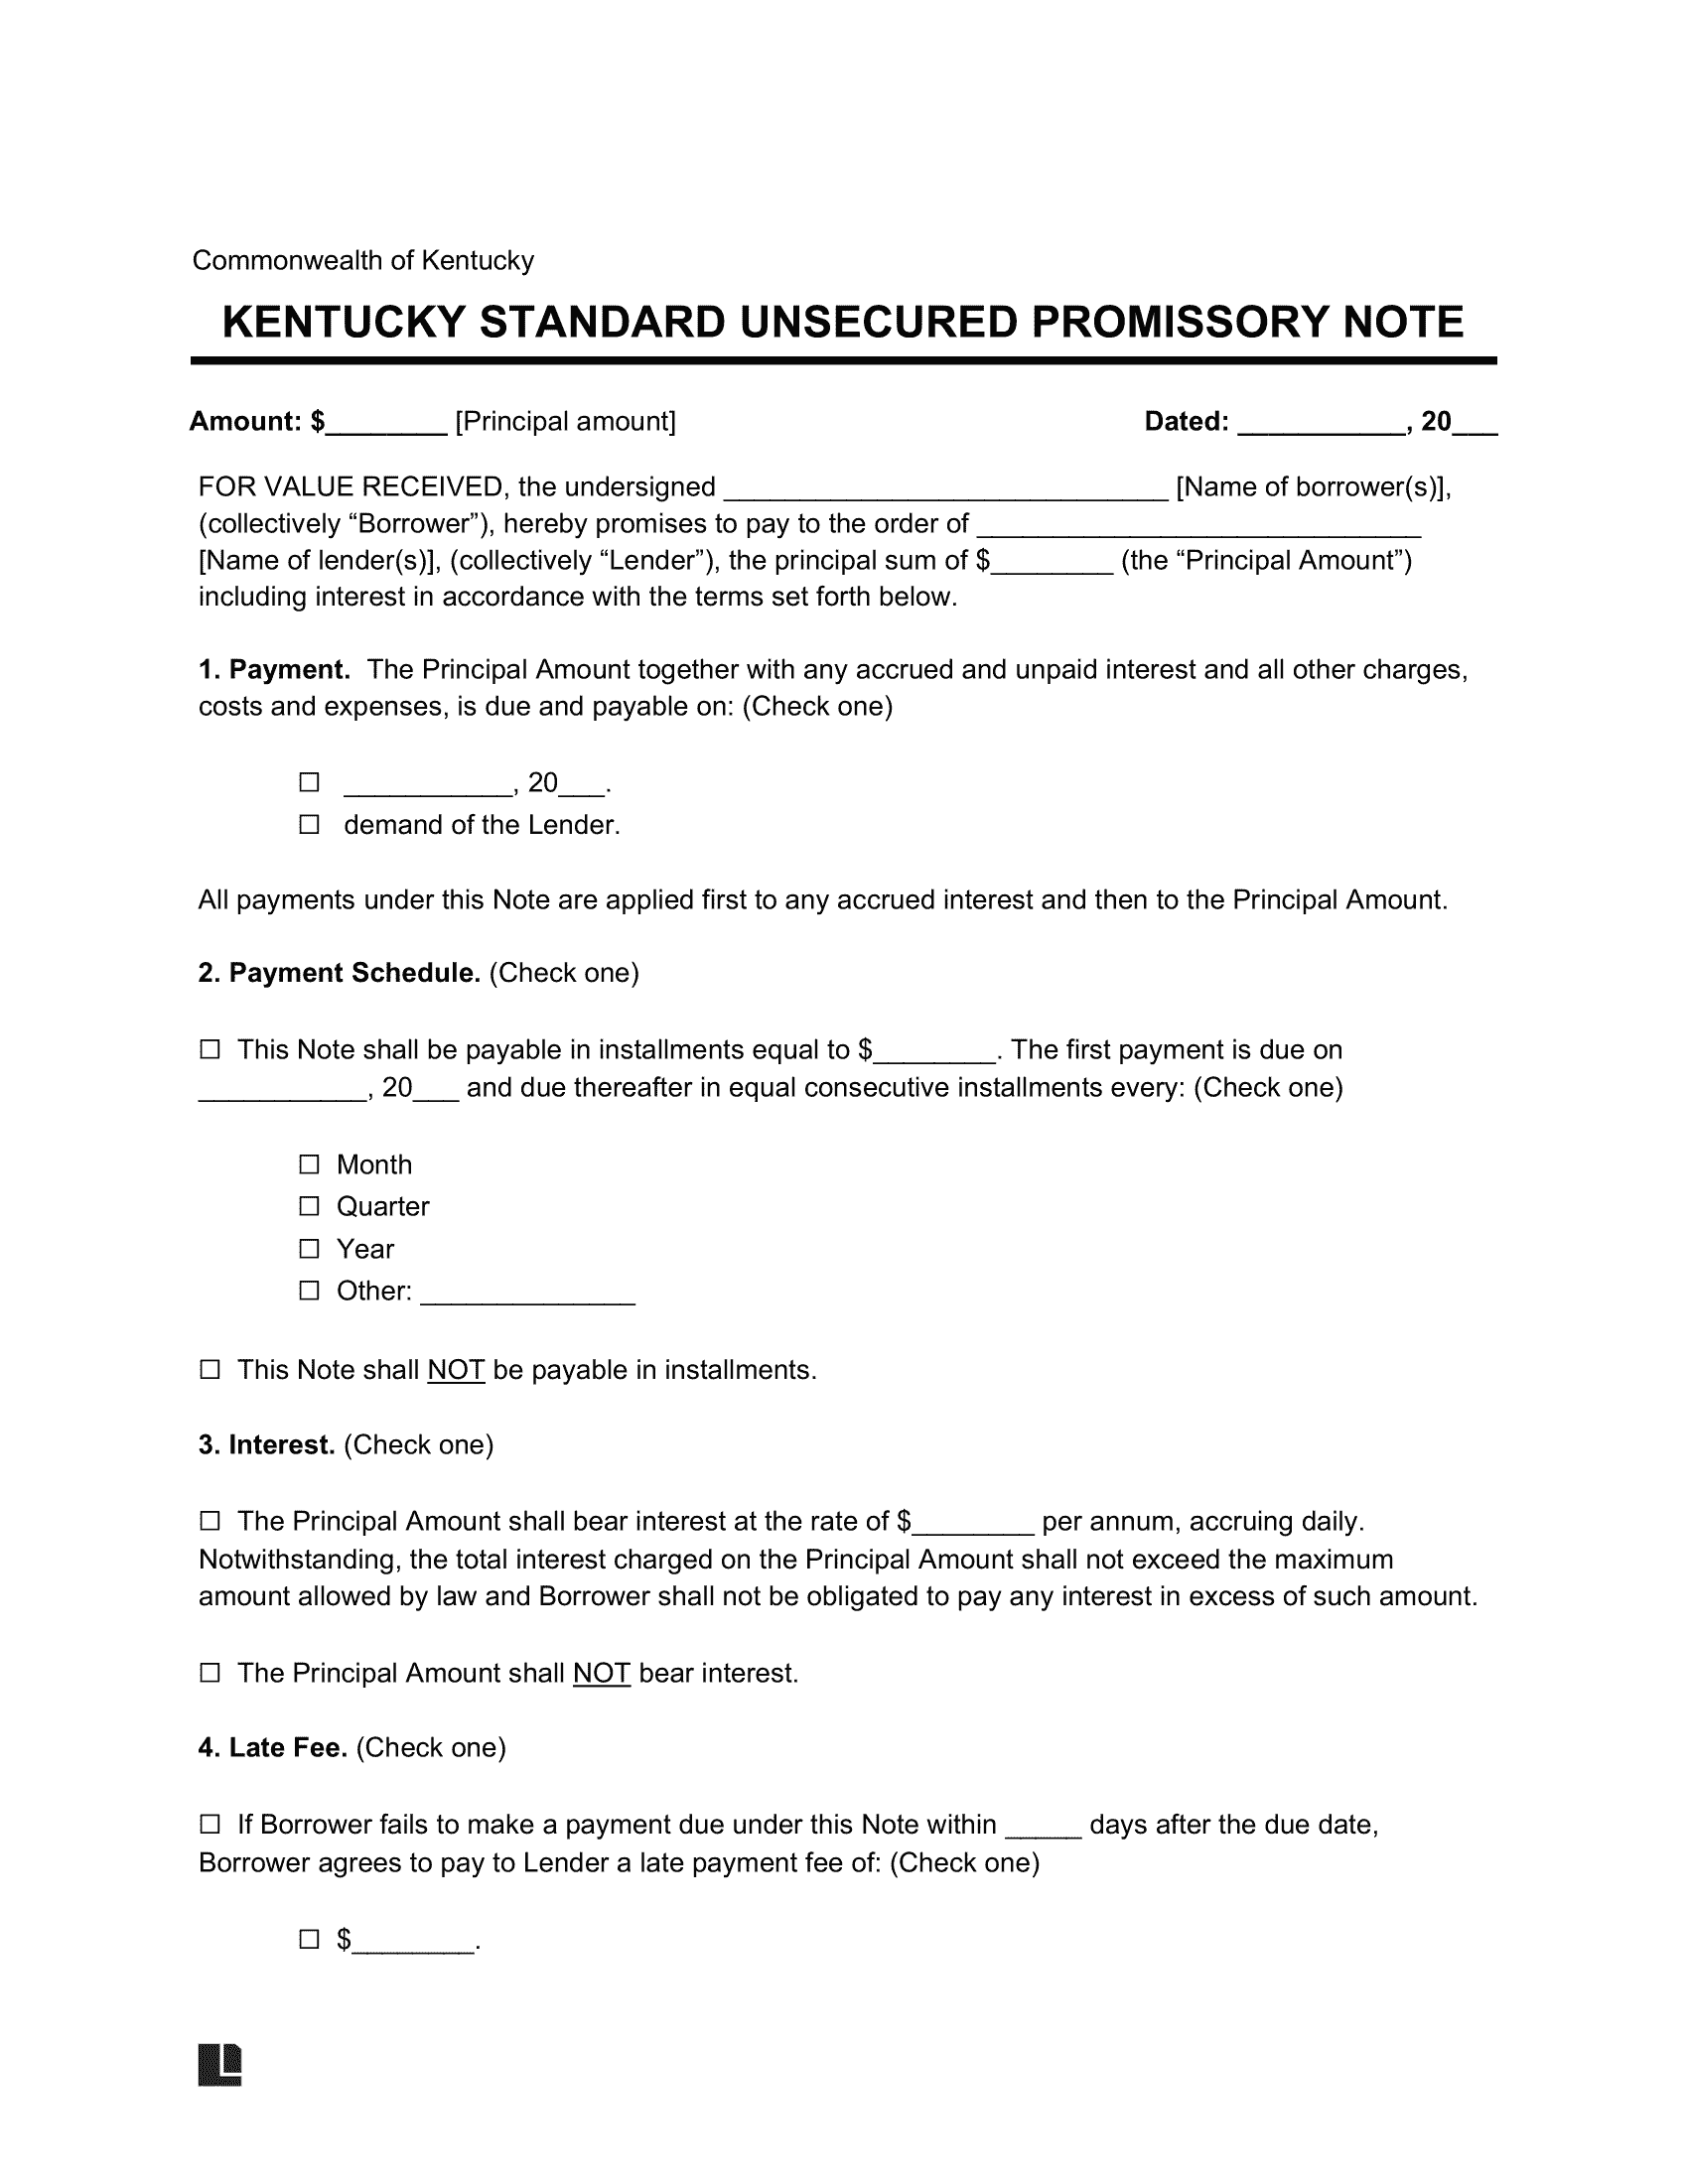 Kentucky Standard Unsecured Promissory Note Template